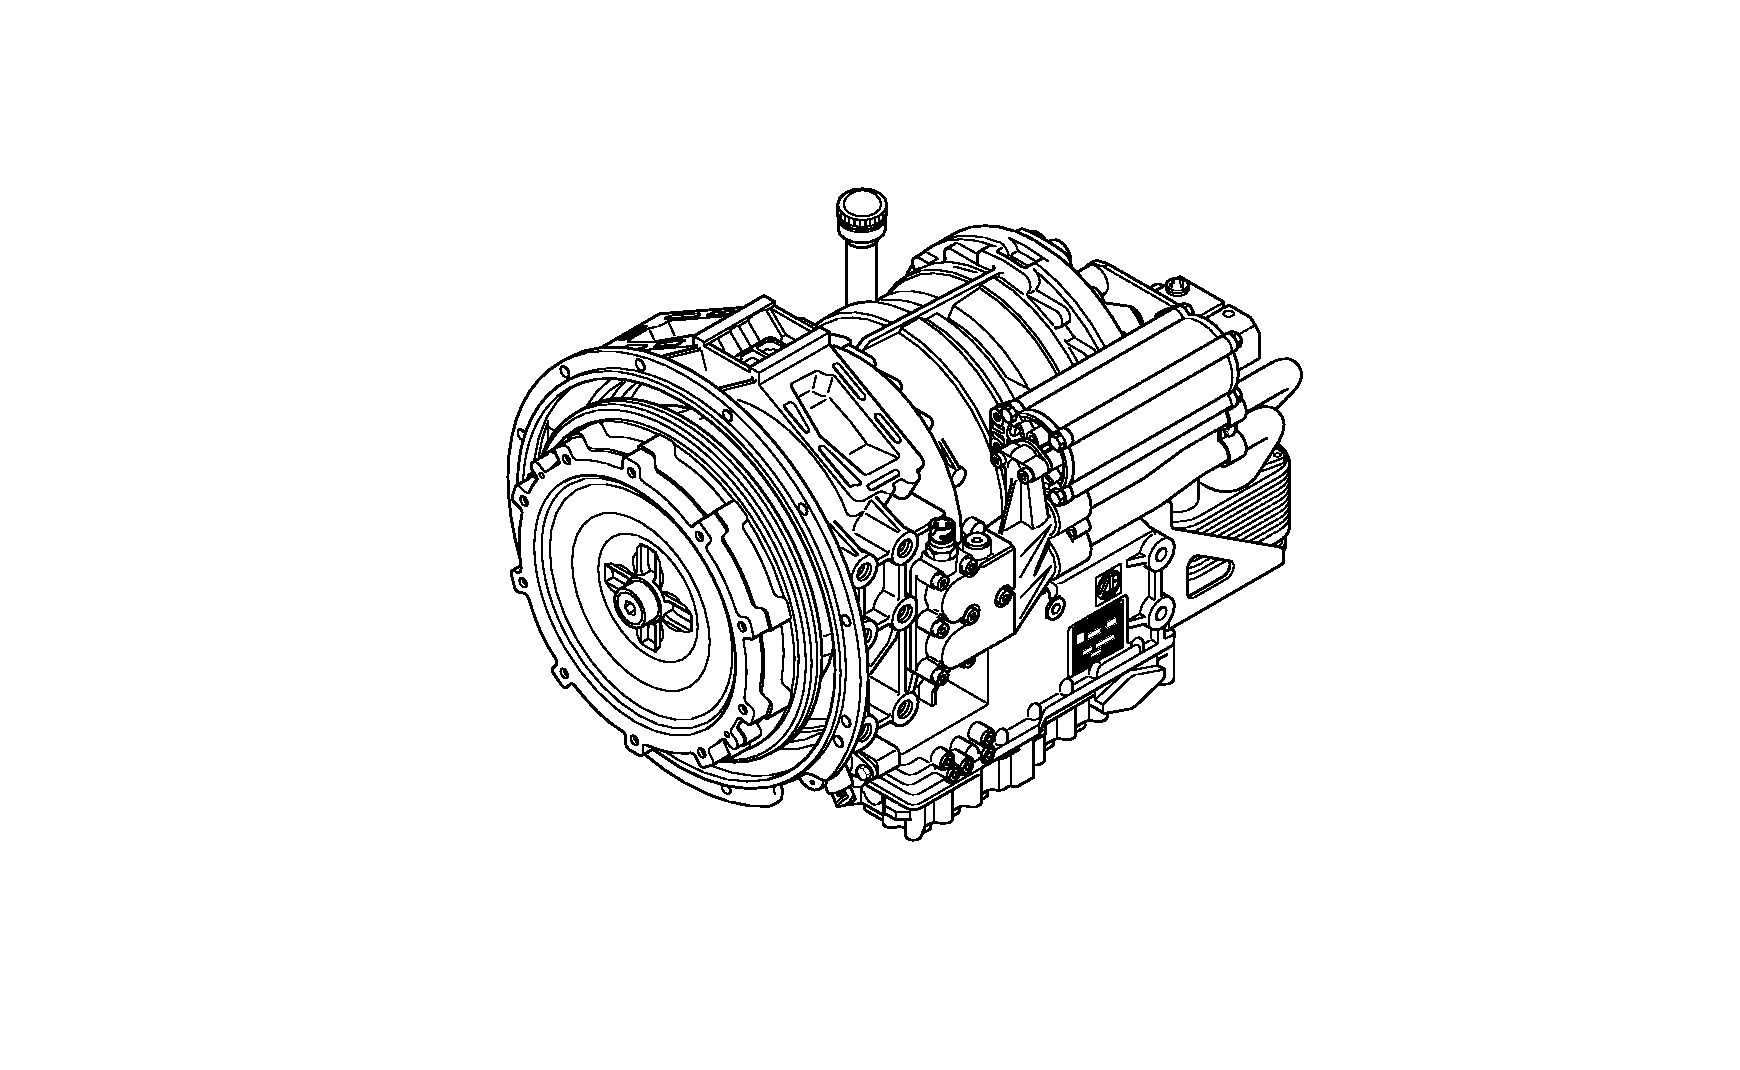 drawing for SCANIA 492856 - EST 46 C (figure 1)